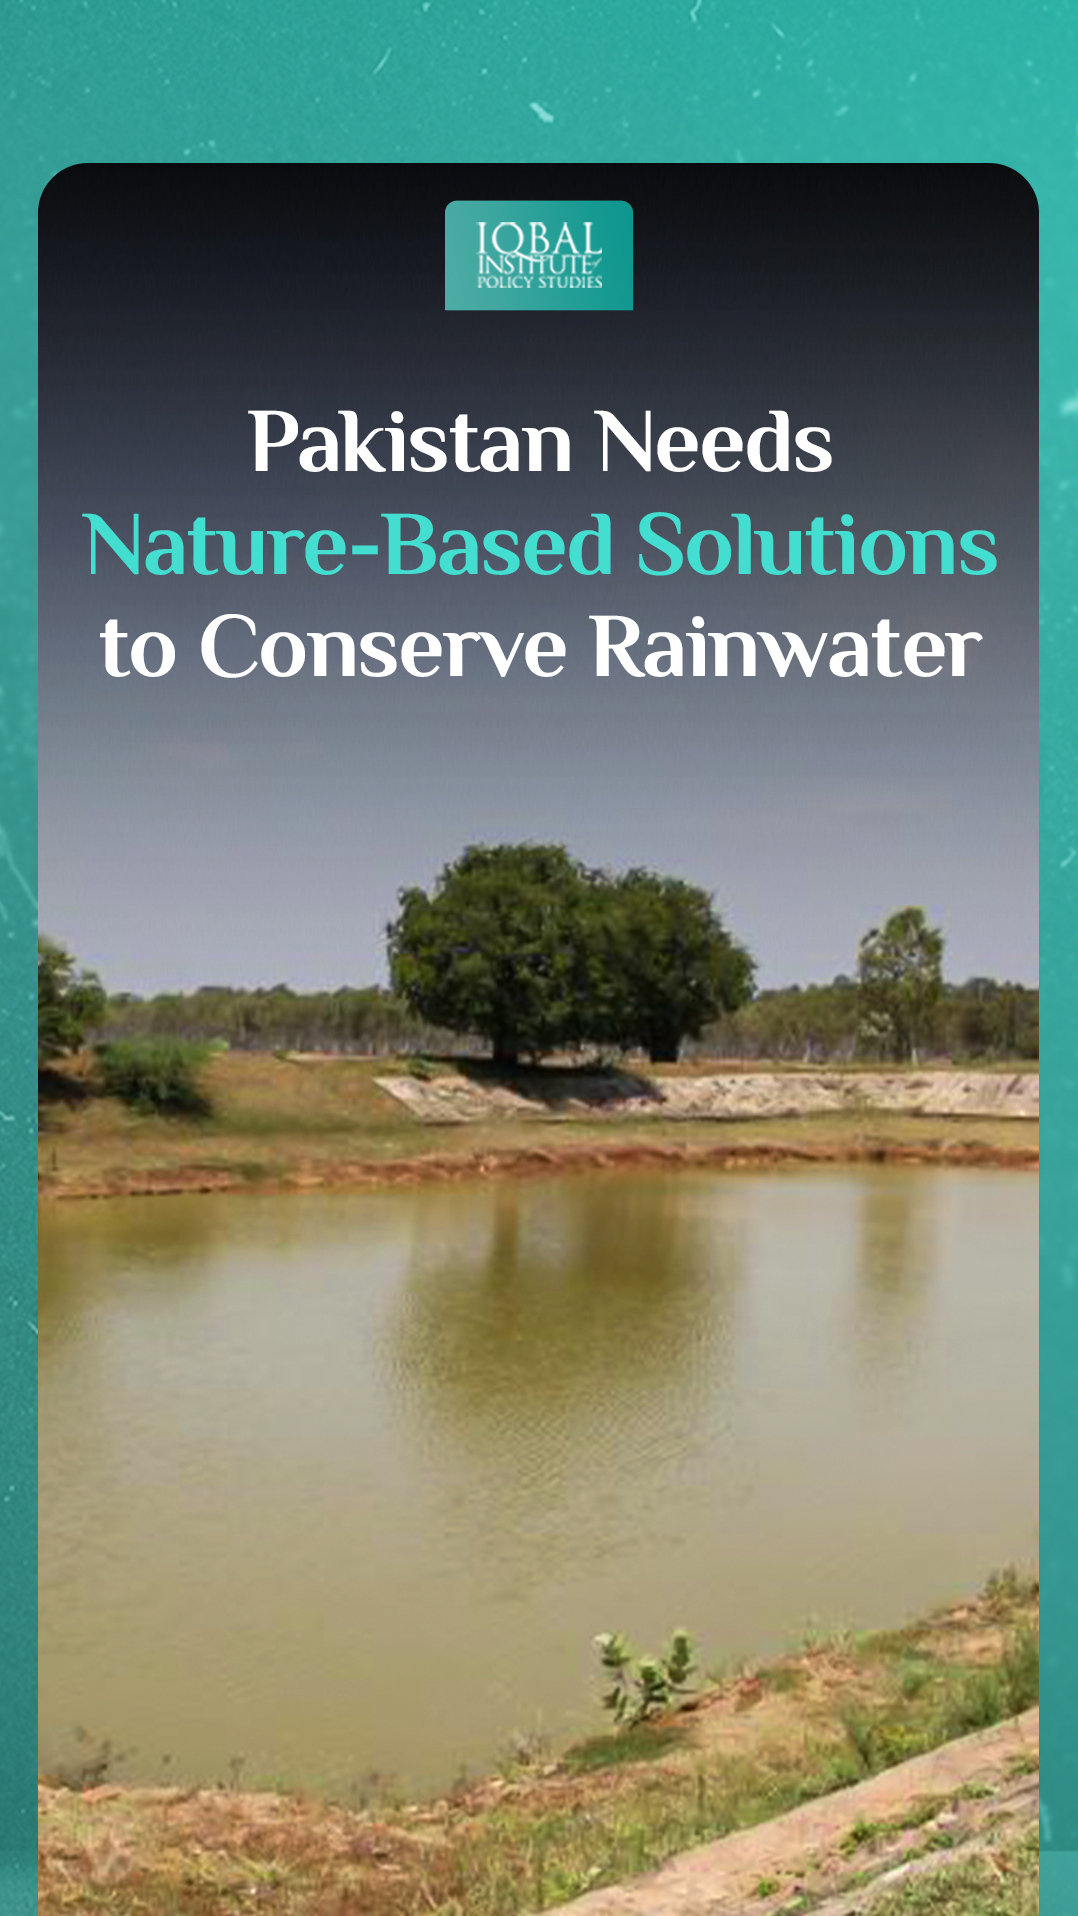 Pakistan needs Nature-Based solutions to conserve rainwater